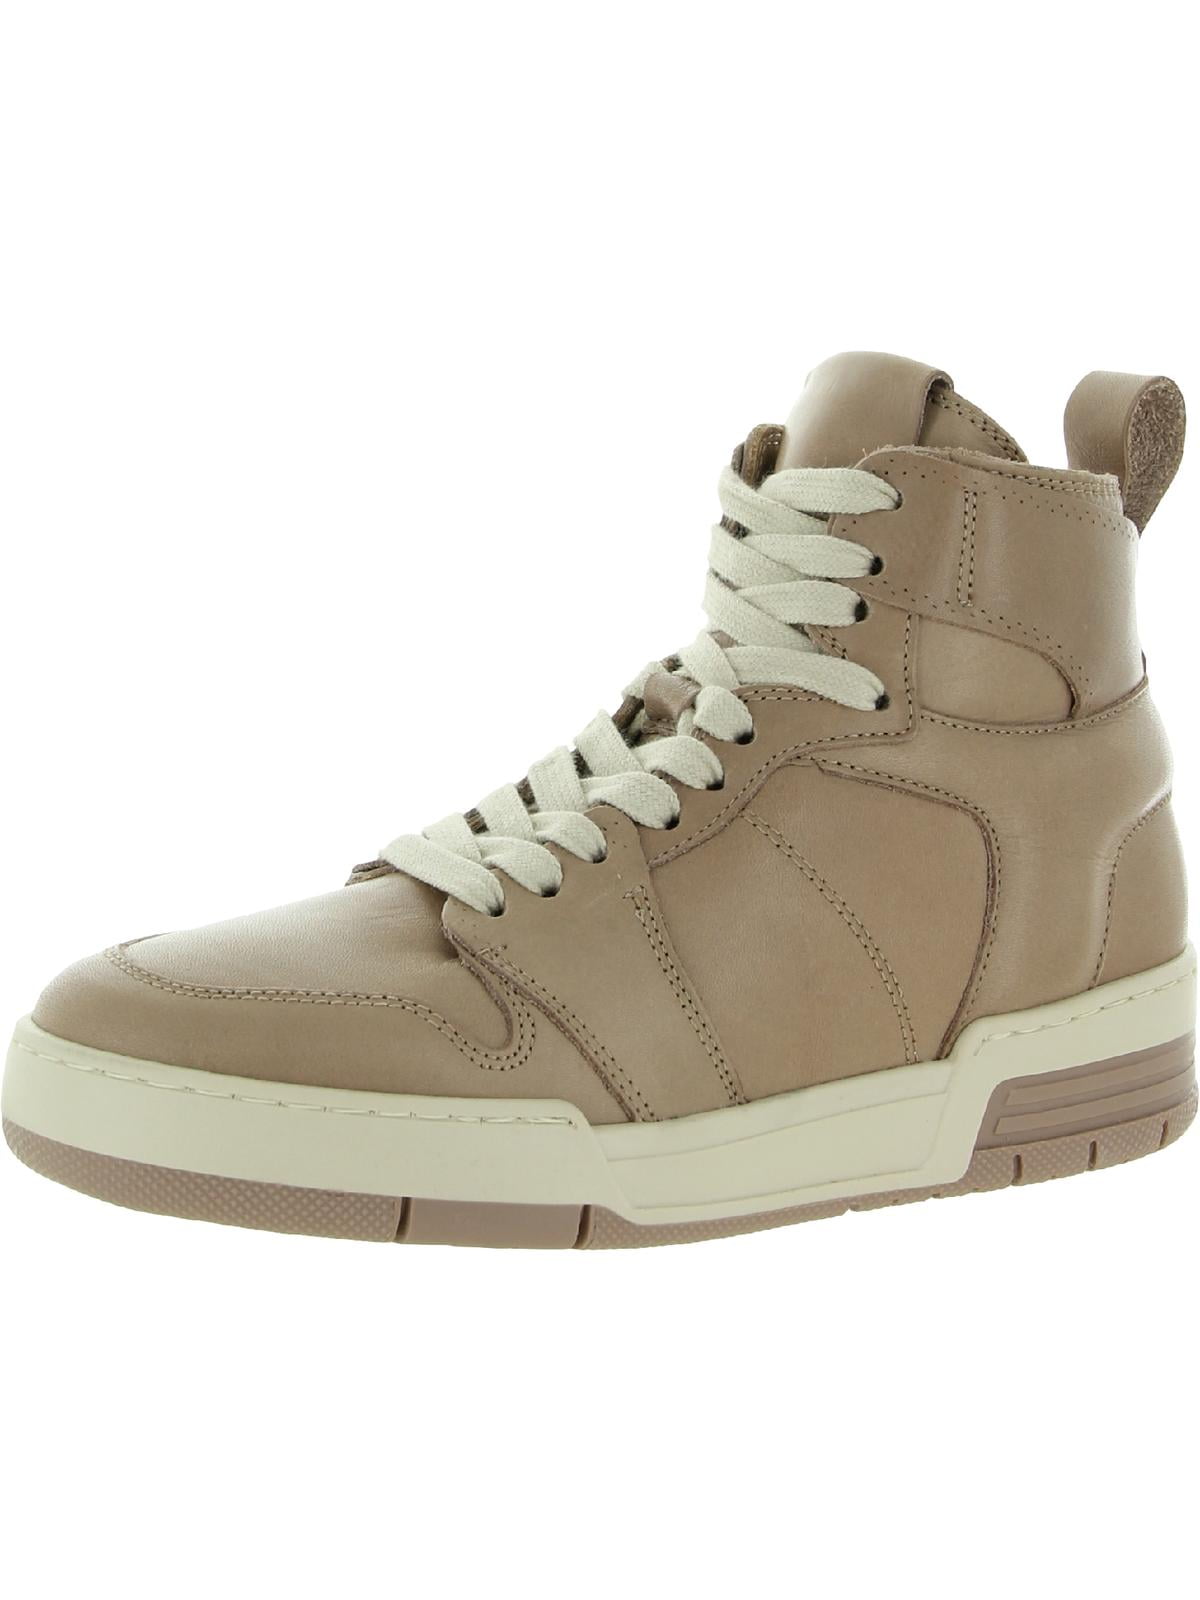 Steve Madden Womens Bizzy Leather High Top Athletic and Training Shoes ...